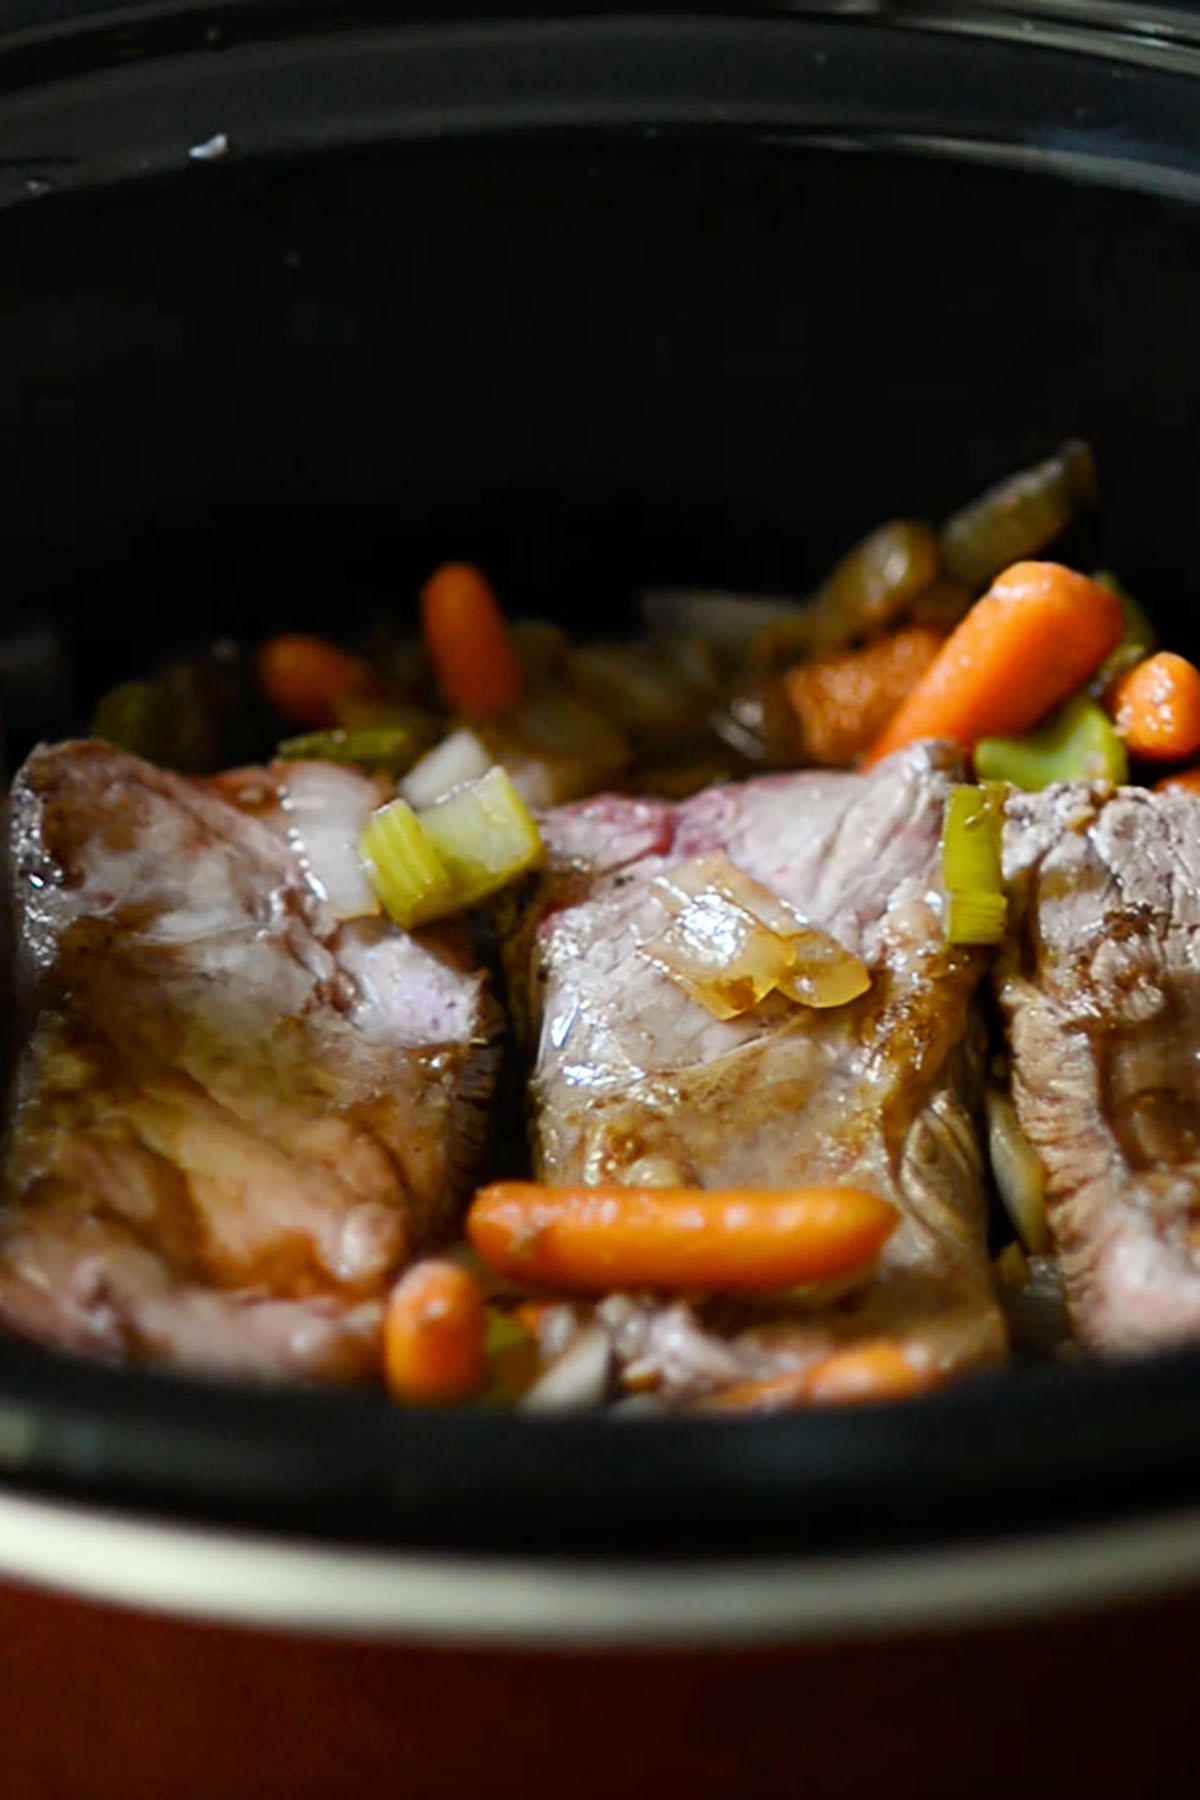 Beef short ribs combined with mixed vegetables in a crock pot.